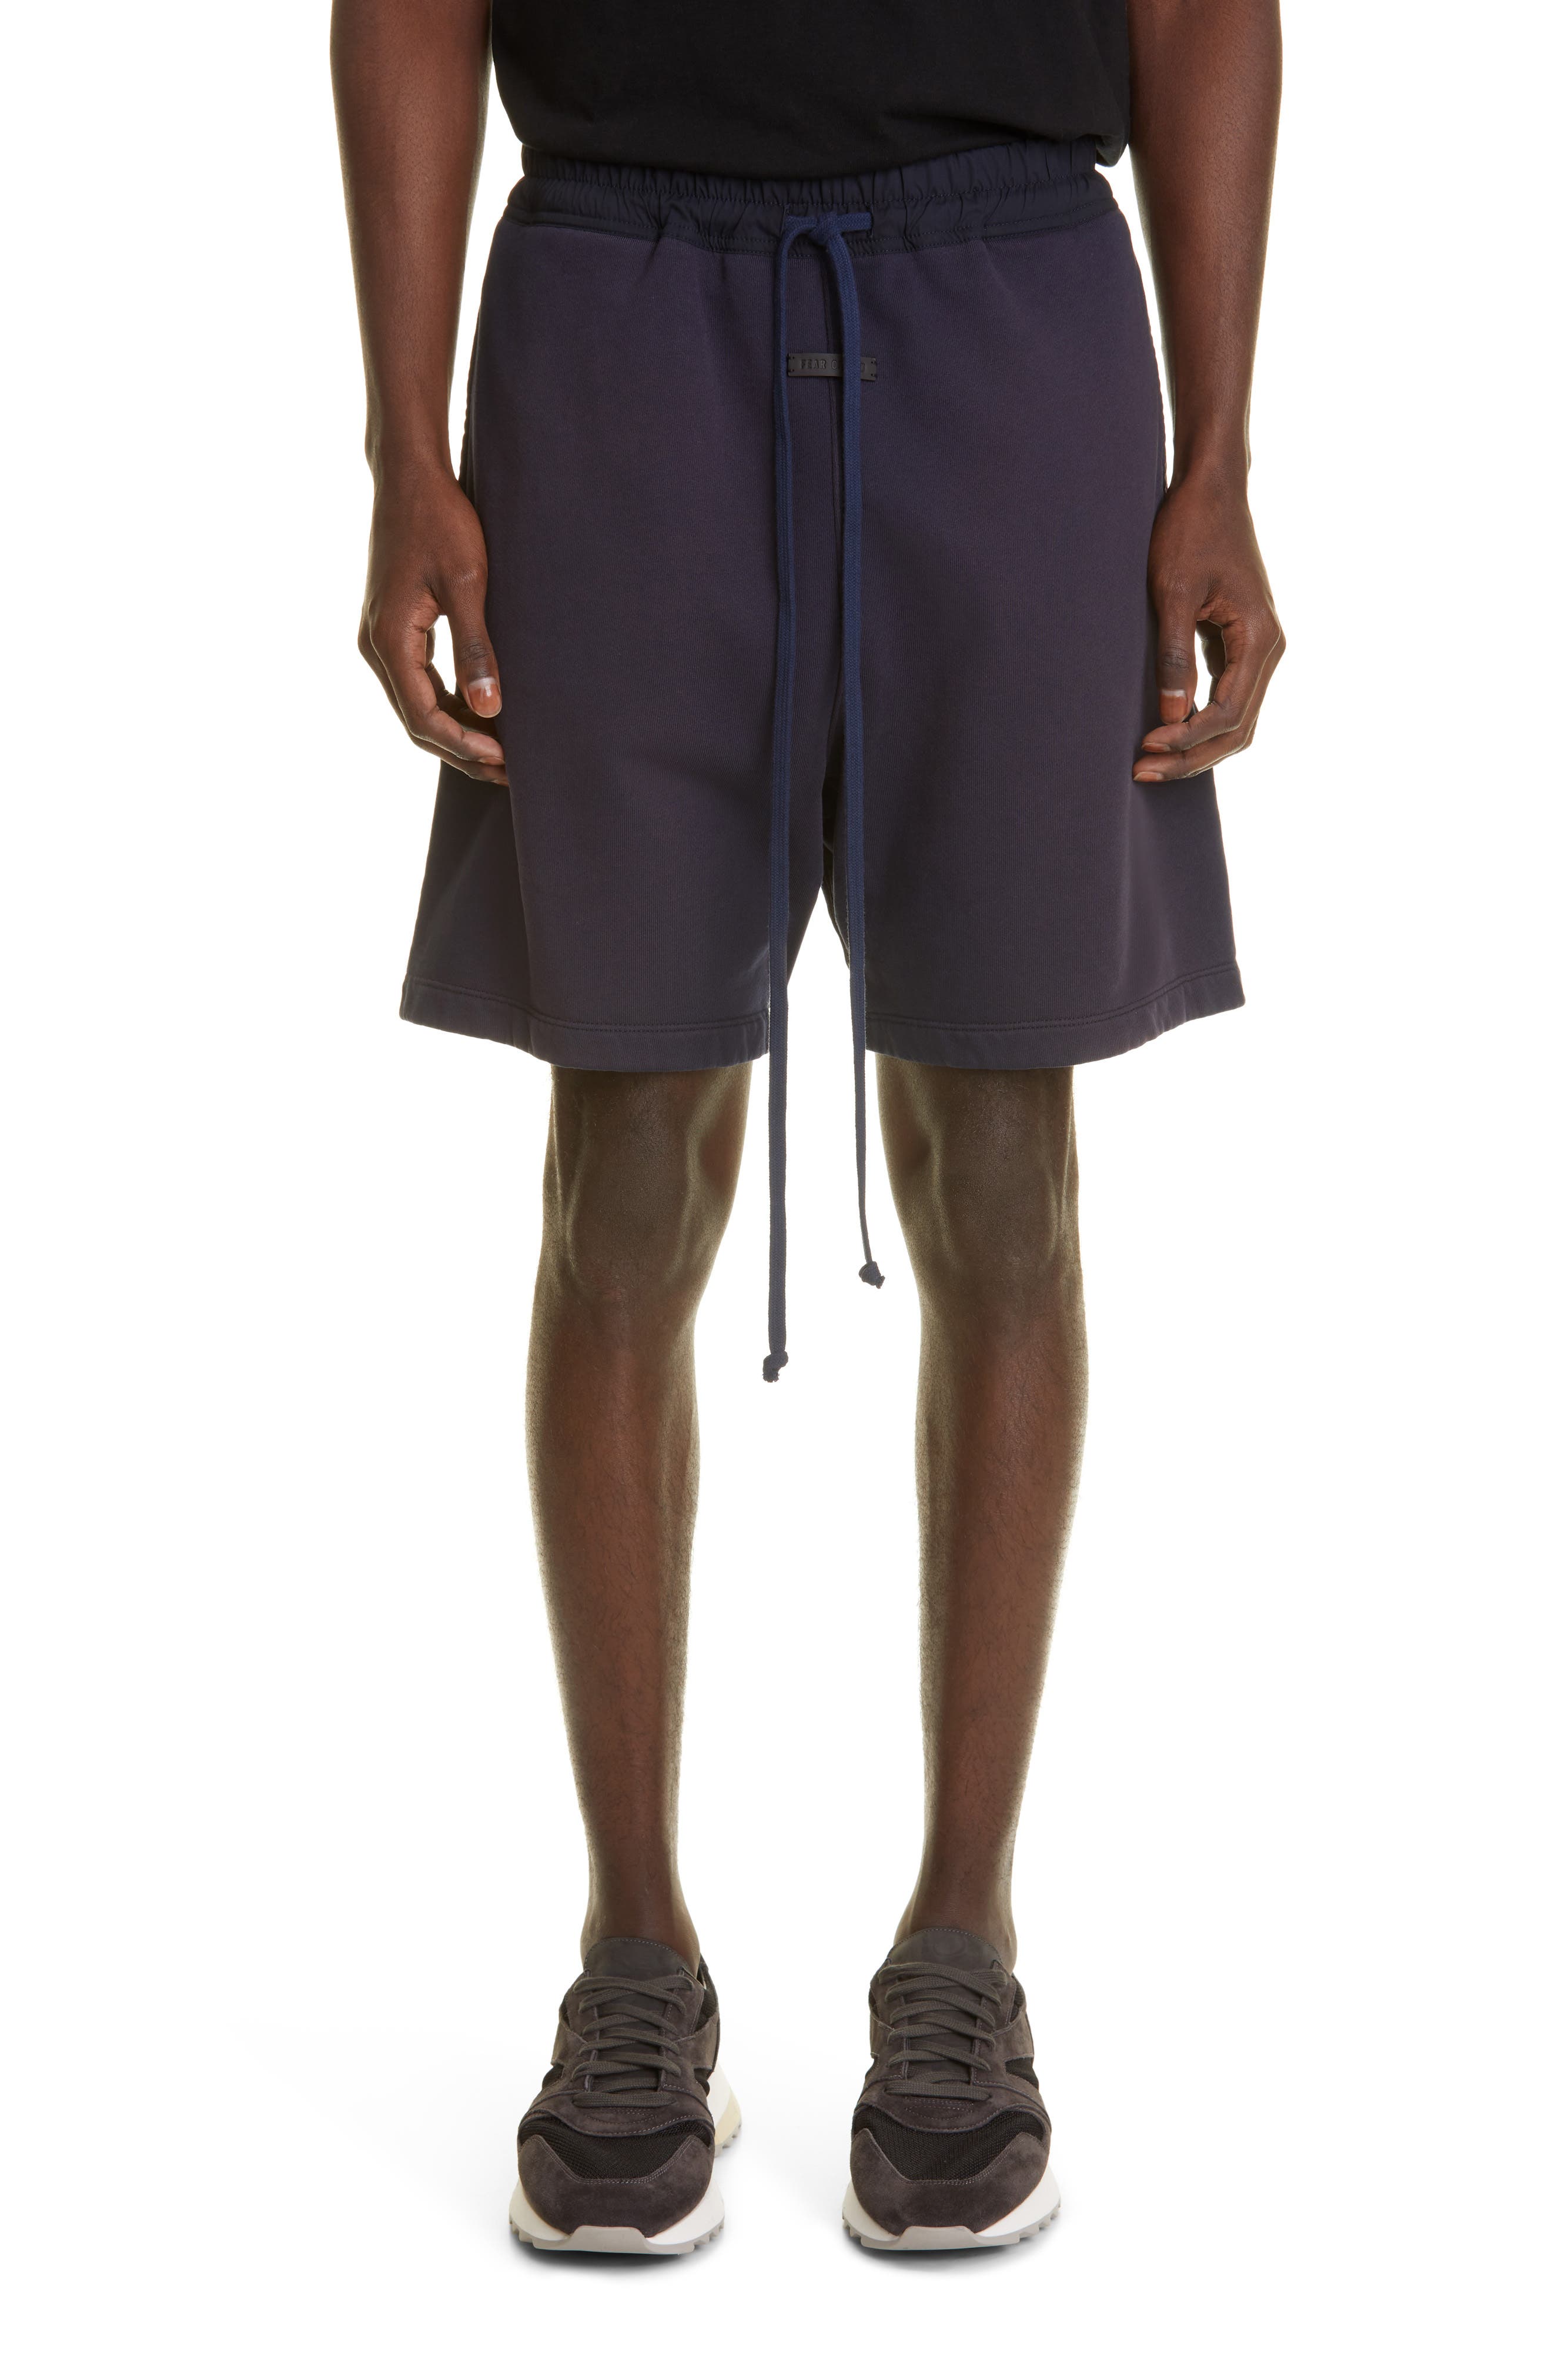 Fear of God The Vintage Cotton Sweat Shorts in Vintage Navy at Nordstrom, Size Small